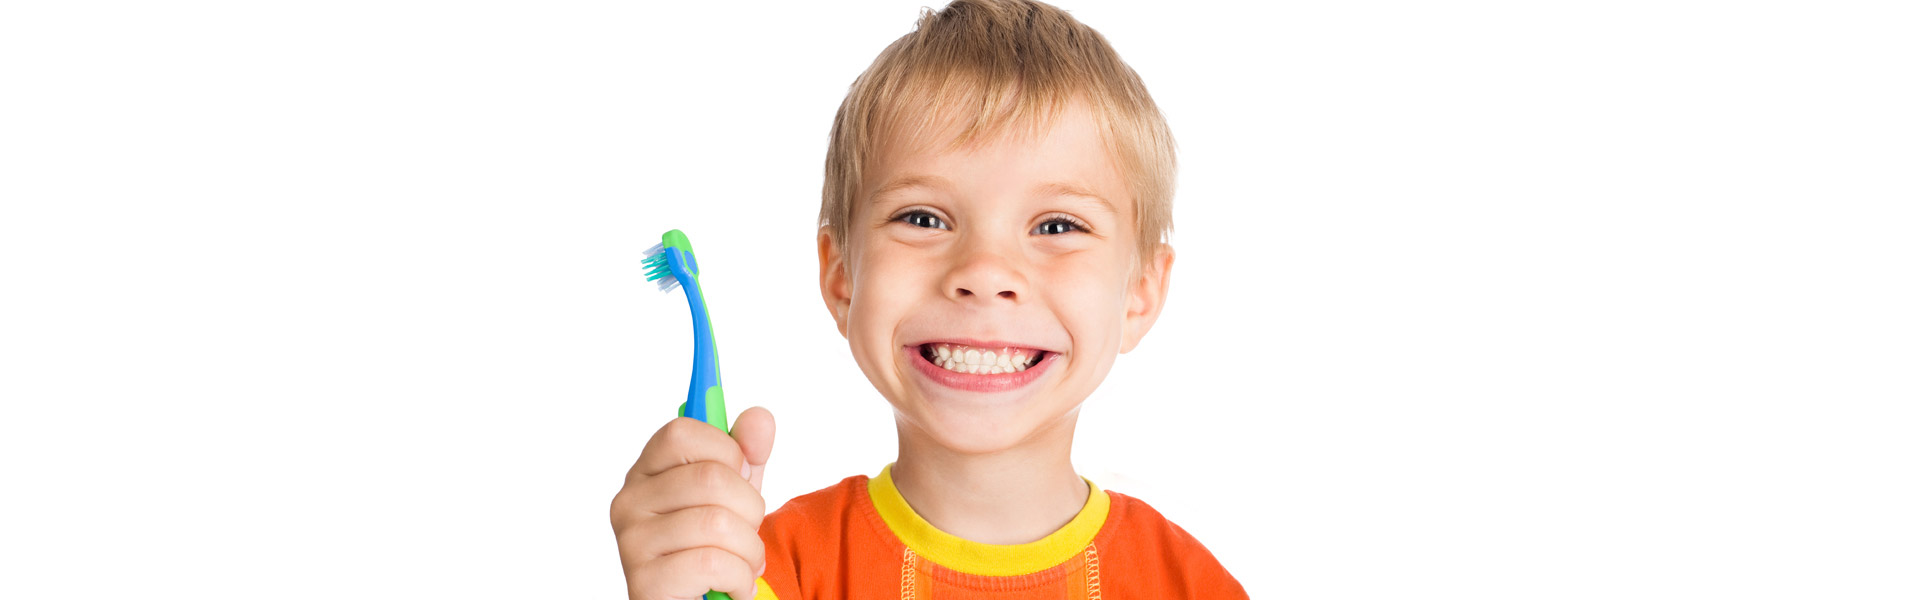 Healthy Brushing Habits For Kids